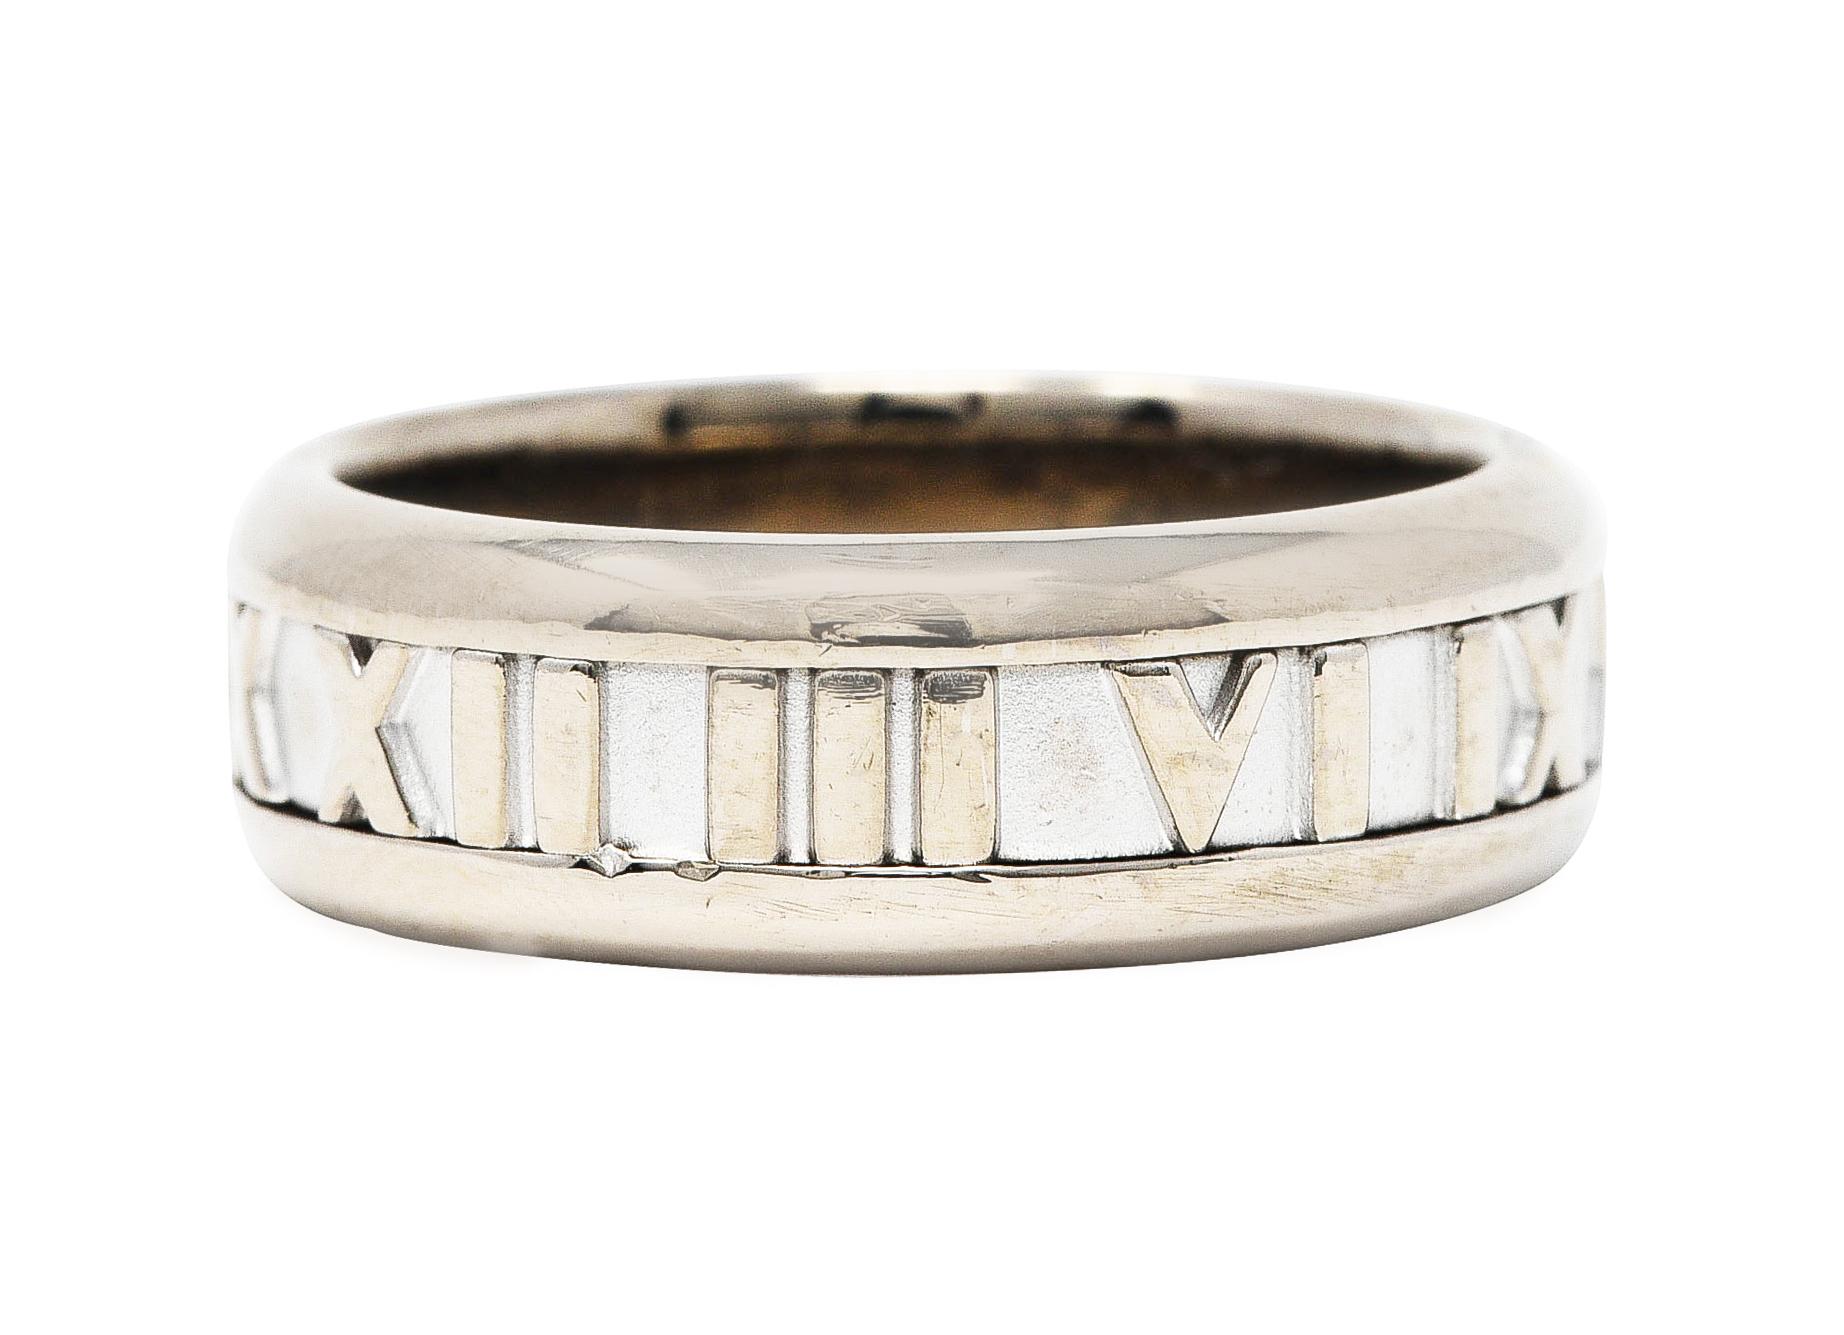 Band style ring designed with row of grooved Roman numerals fully around

Featuring high polished numbers and edges

Stamped 750 for 18 karat white gold

Fully signed 2003 Tiffany & Co. from the Atlas collection

Ring size: 7 3/4 and not